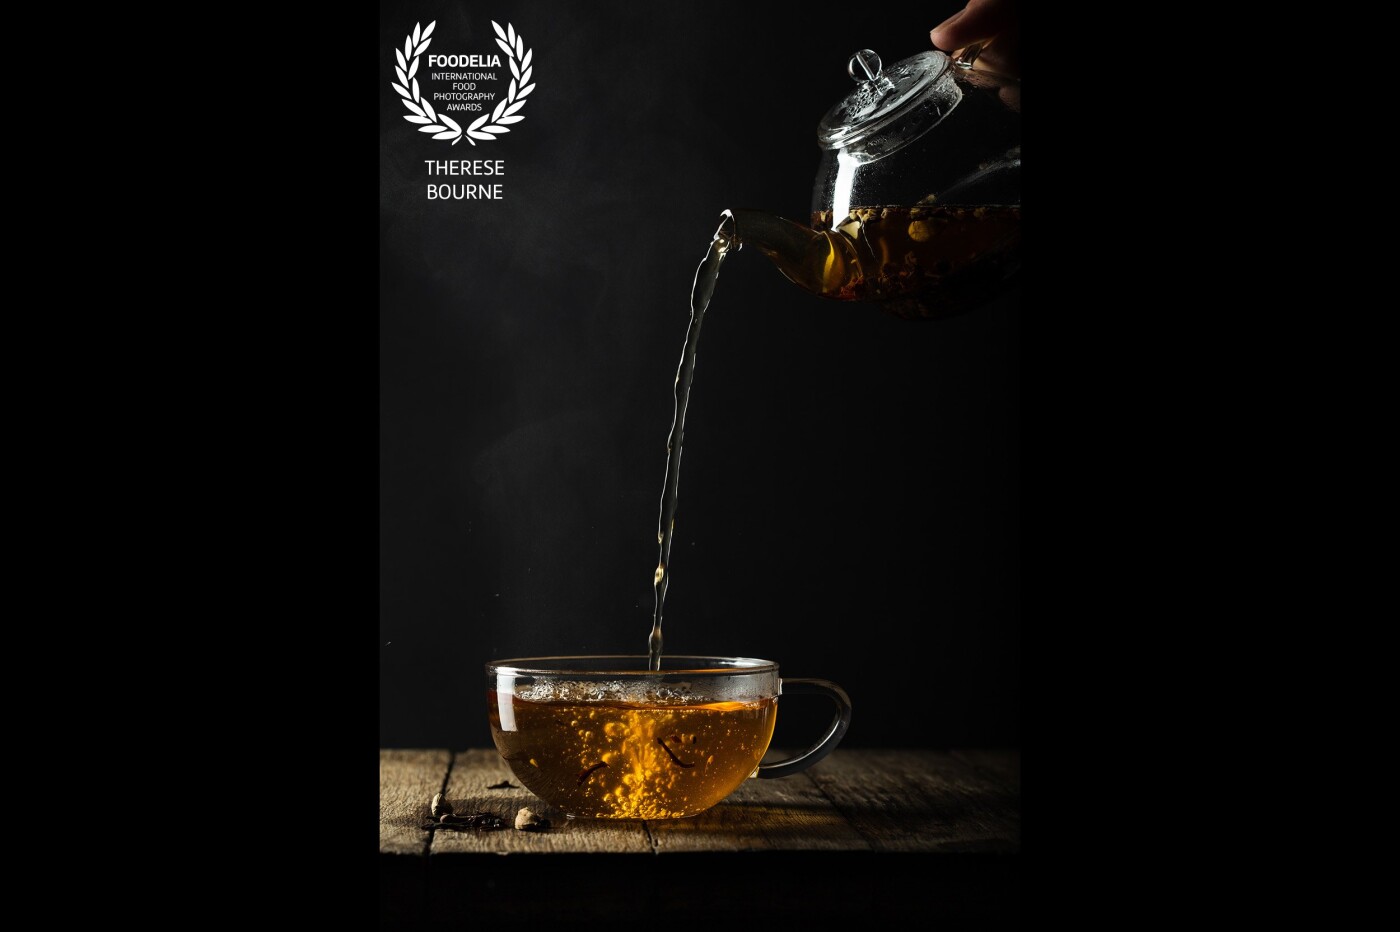 I've always been fascinated by the rituals of tea pouring all over the world and wanted to capture the 'almost spiritual' moment the light catches the golden liquid and the ethereal steam. It took over fifty attempts to get it just right!<br />
<br />
Canon EOS 1DX, 100mm macro f/2.8 USM, ISO 125, 1/250 sec, f/9.0